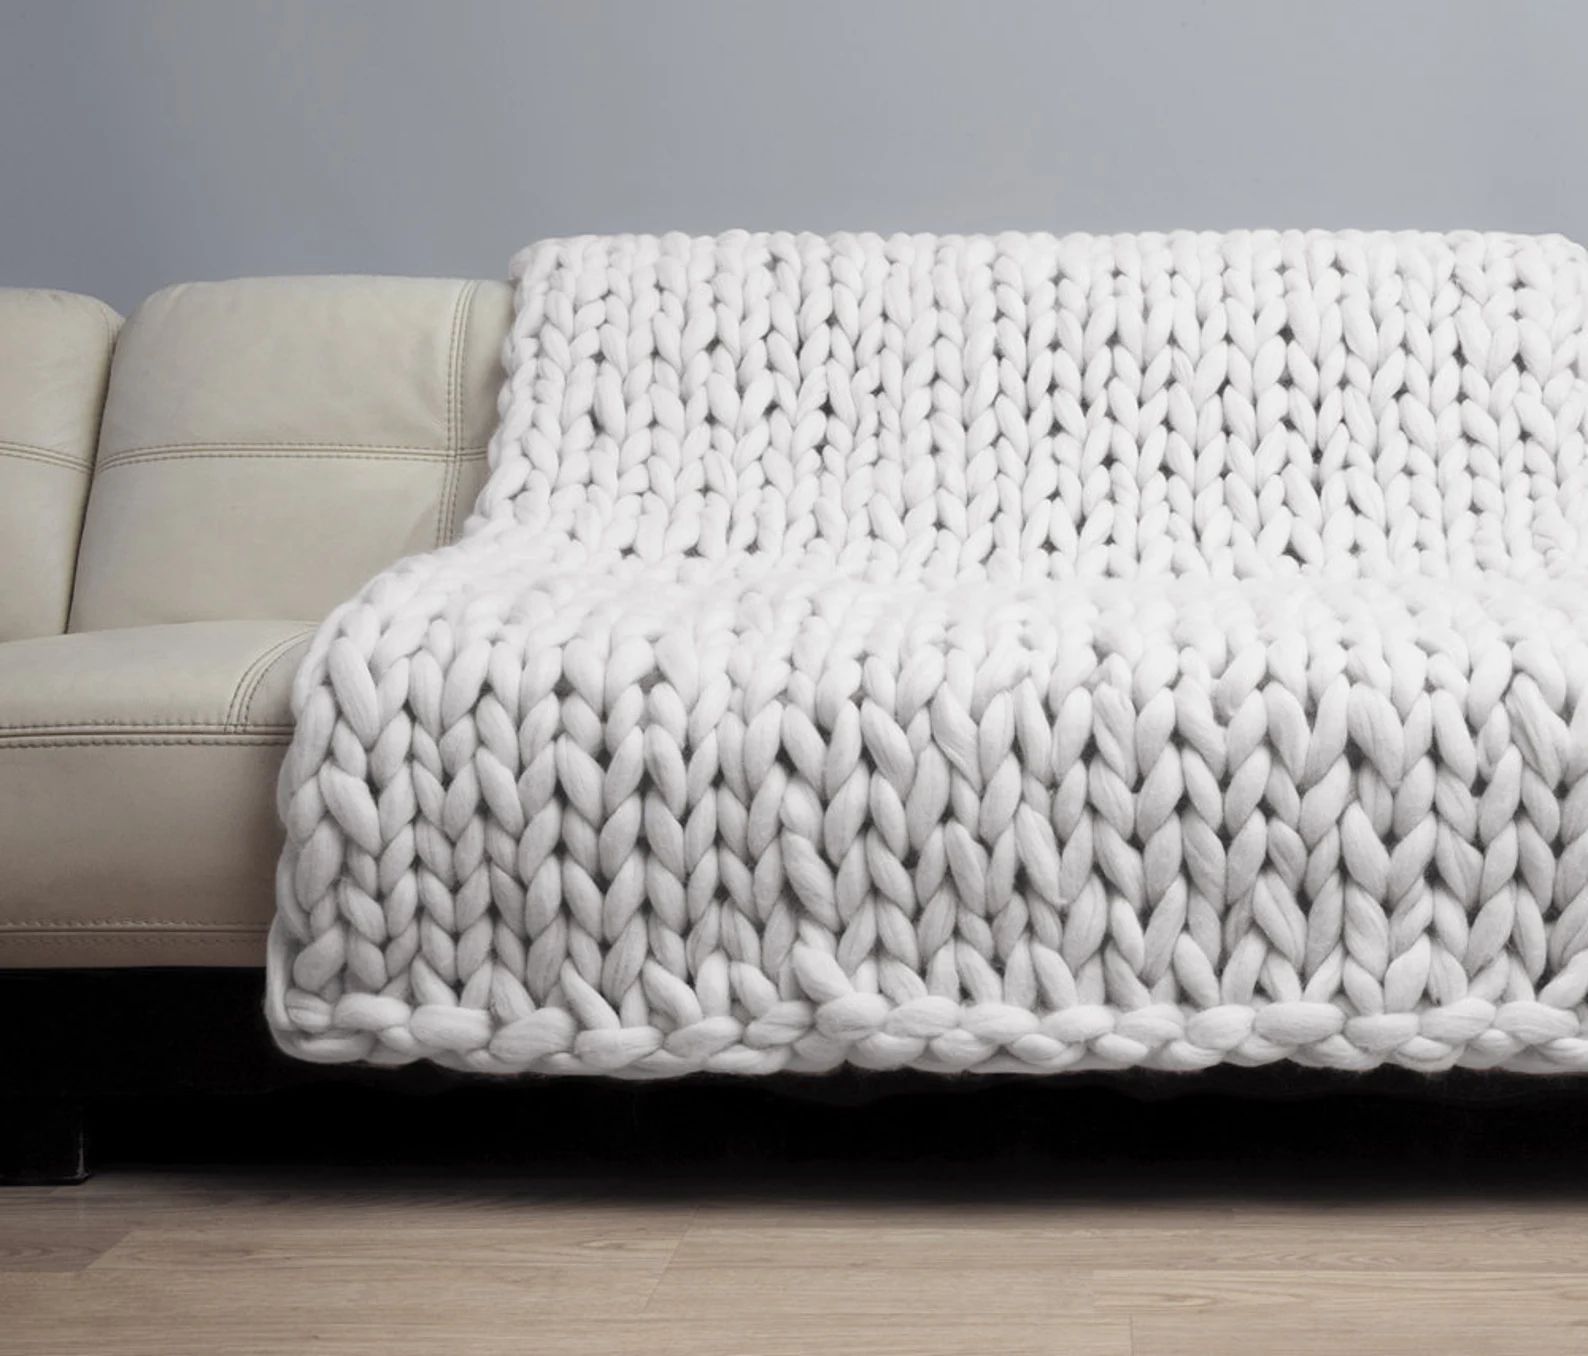 Chunky knit Blanket. Merino Wool Blanket. Bulky Blanket. Extreme Knitting by woolWow! Milk color. | Etsy (US)